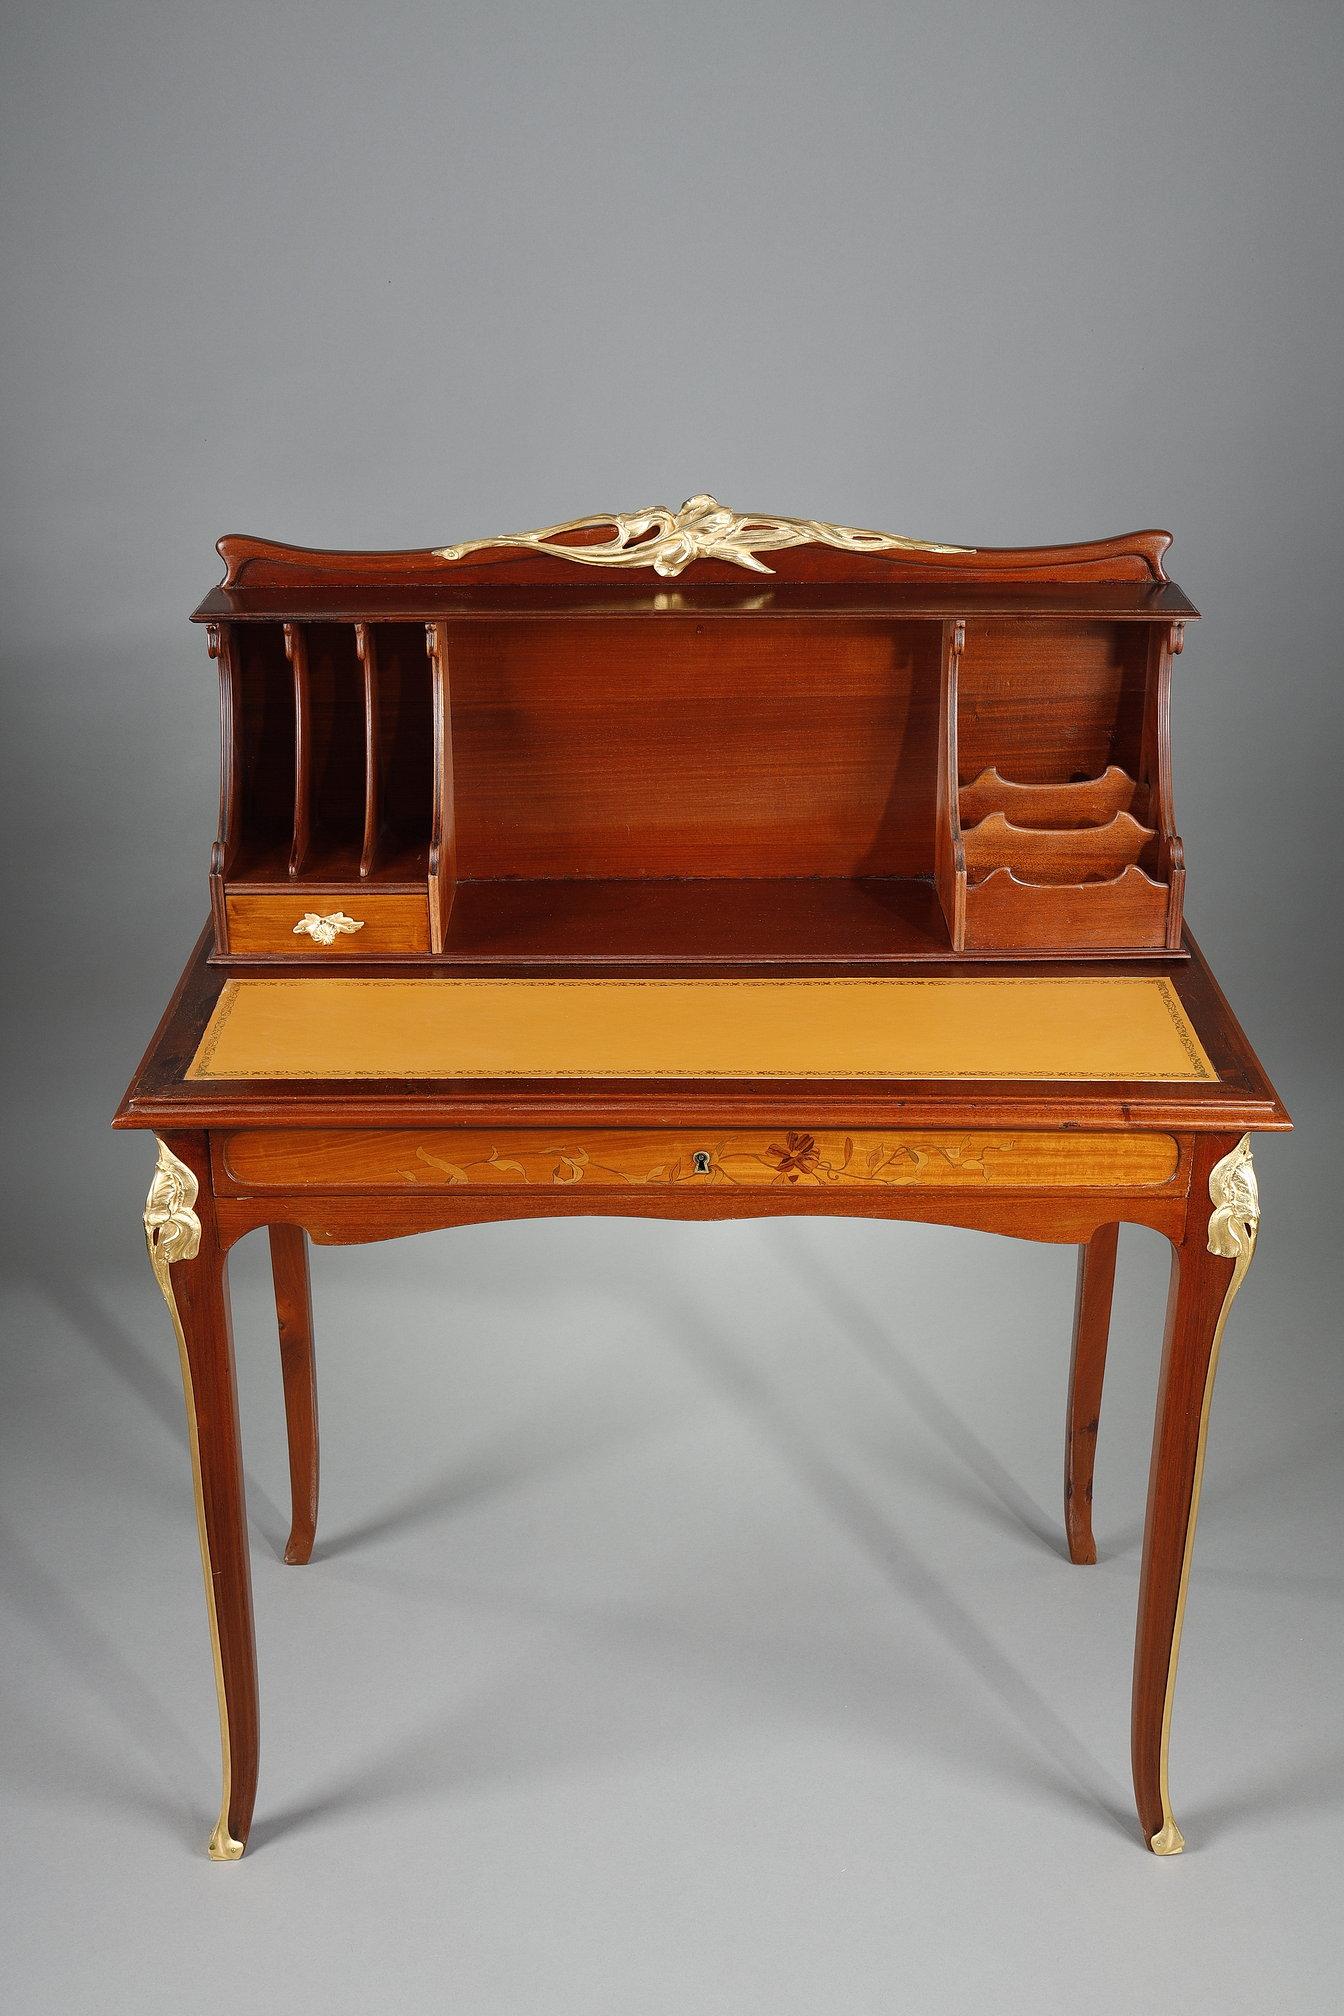 Elegant stepped desk in mahogany and mahogany veneer. Gilt bronze frame opening with a drawer inlaid with leaf and flower stems. The front features a drawer with an ormolu catch and compartments forming a courier tray. The legs and top are